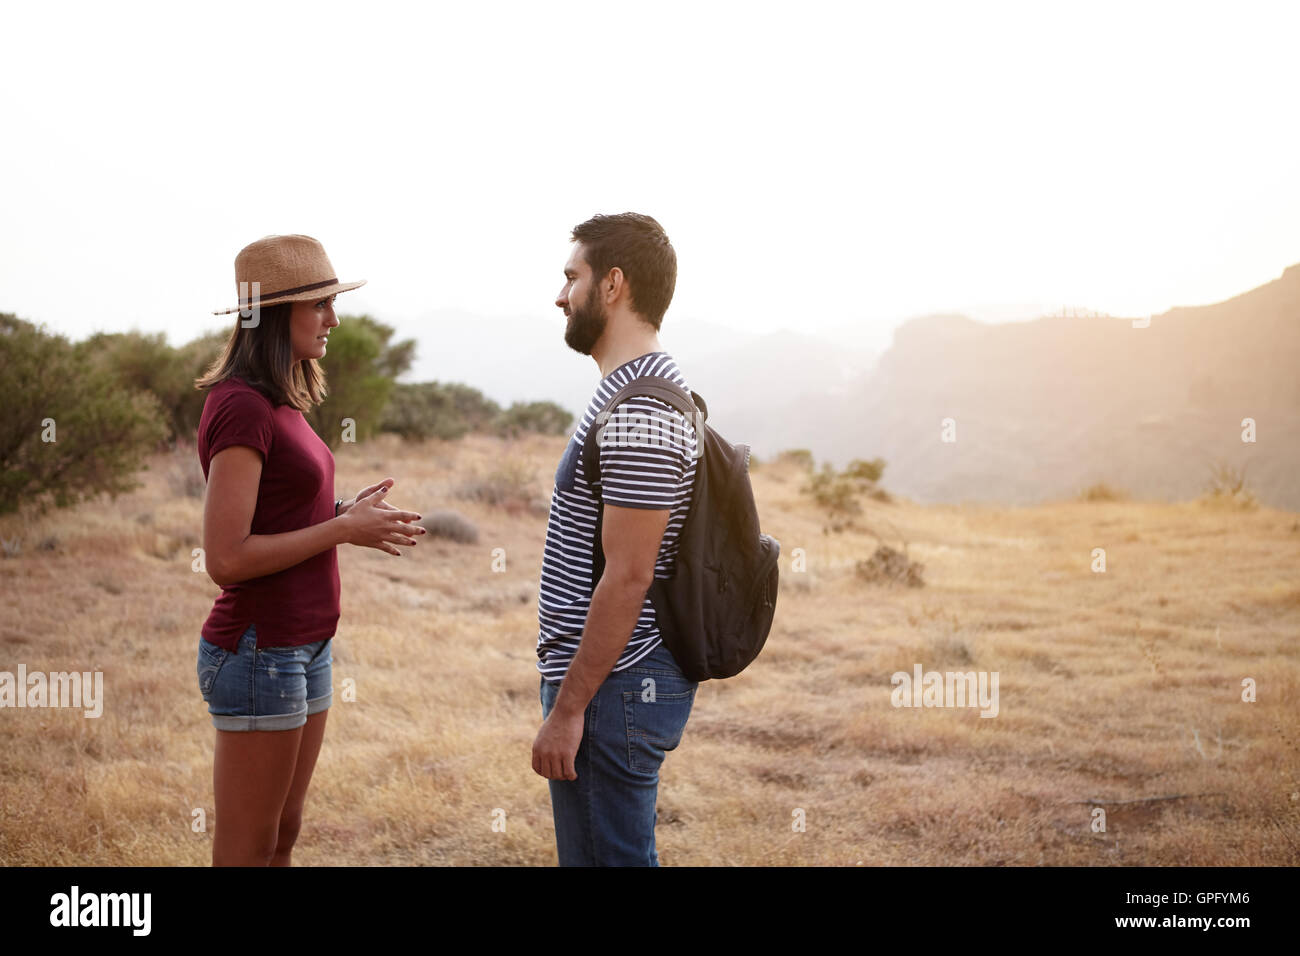 Nice young couple talking on a plato on a mountain in bright sunshine wearing t-shirts and jeans and a straw hat and backpack Stock Photo